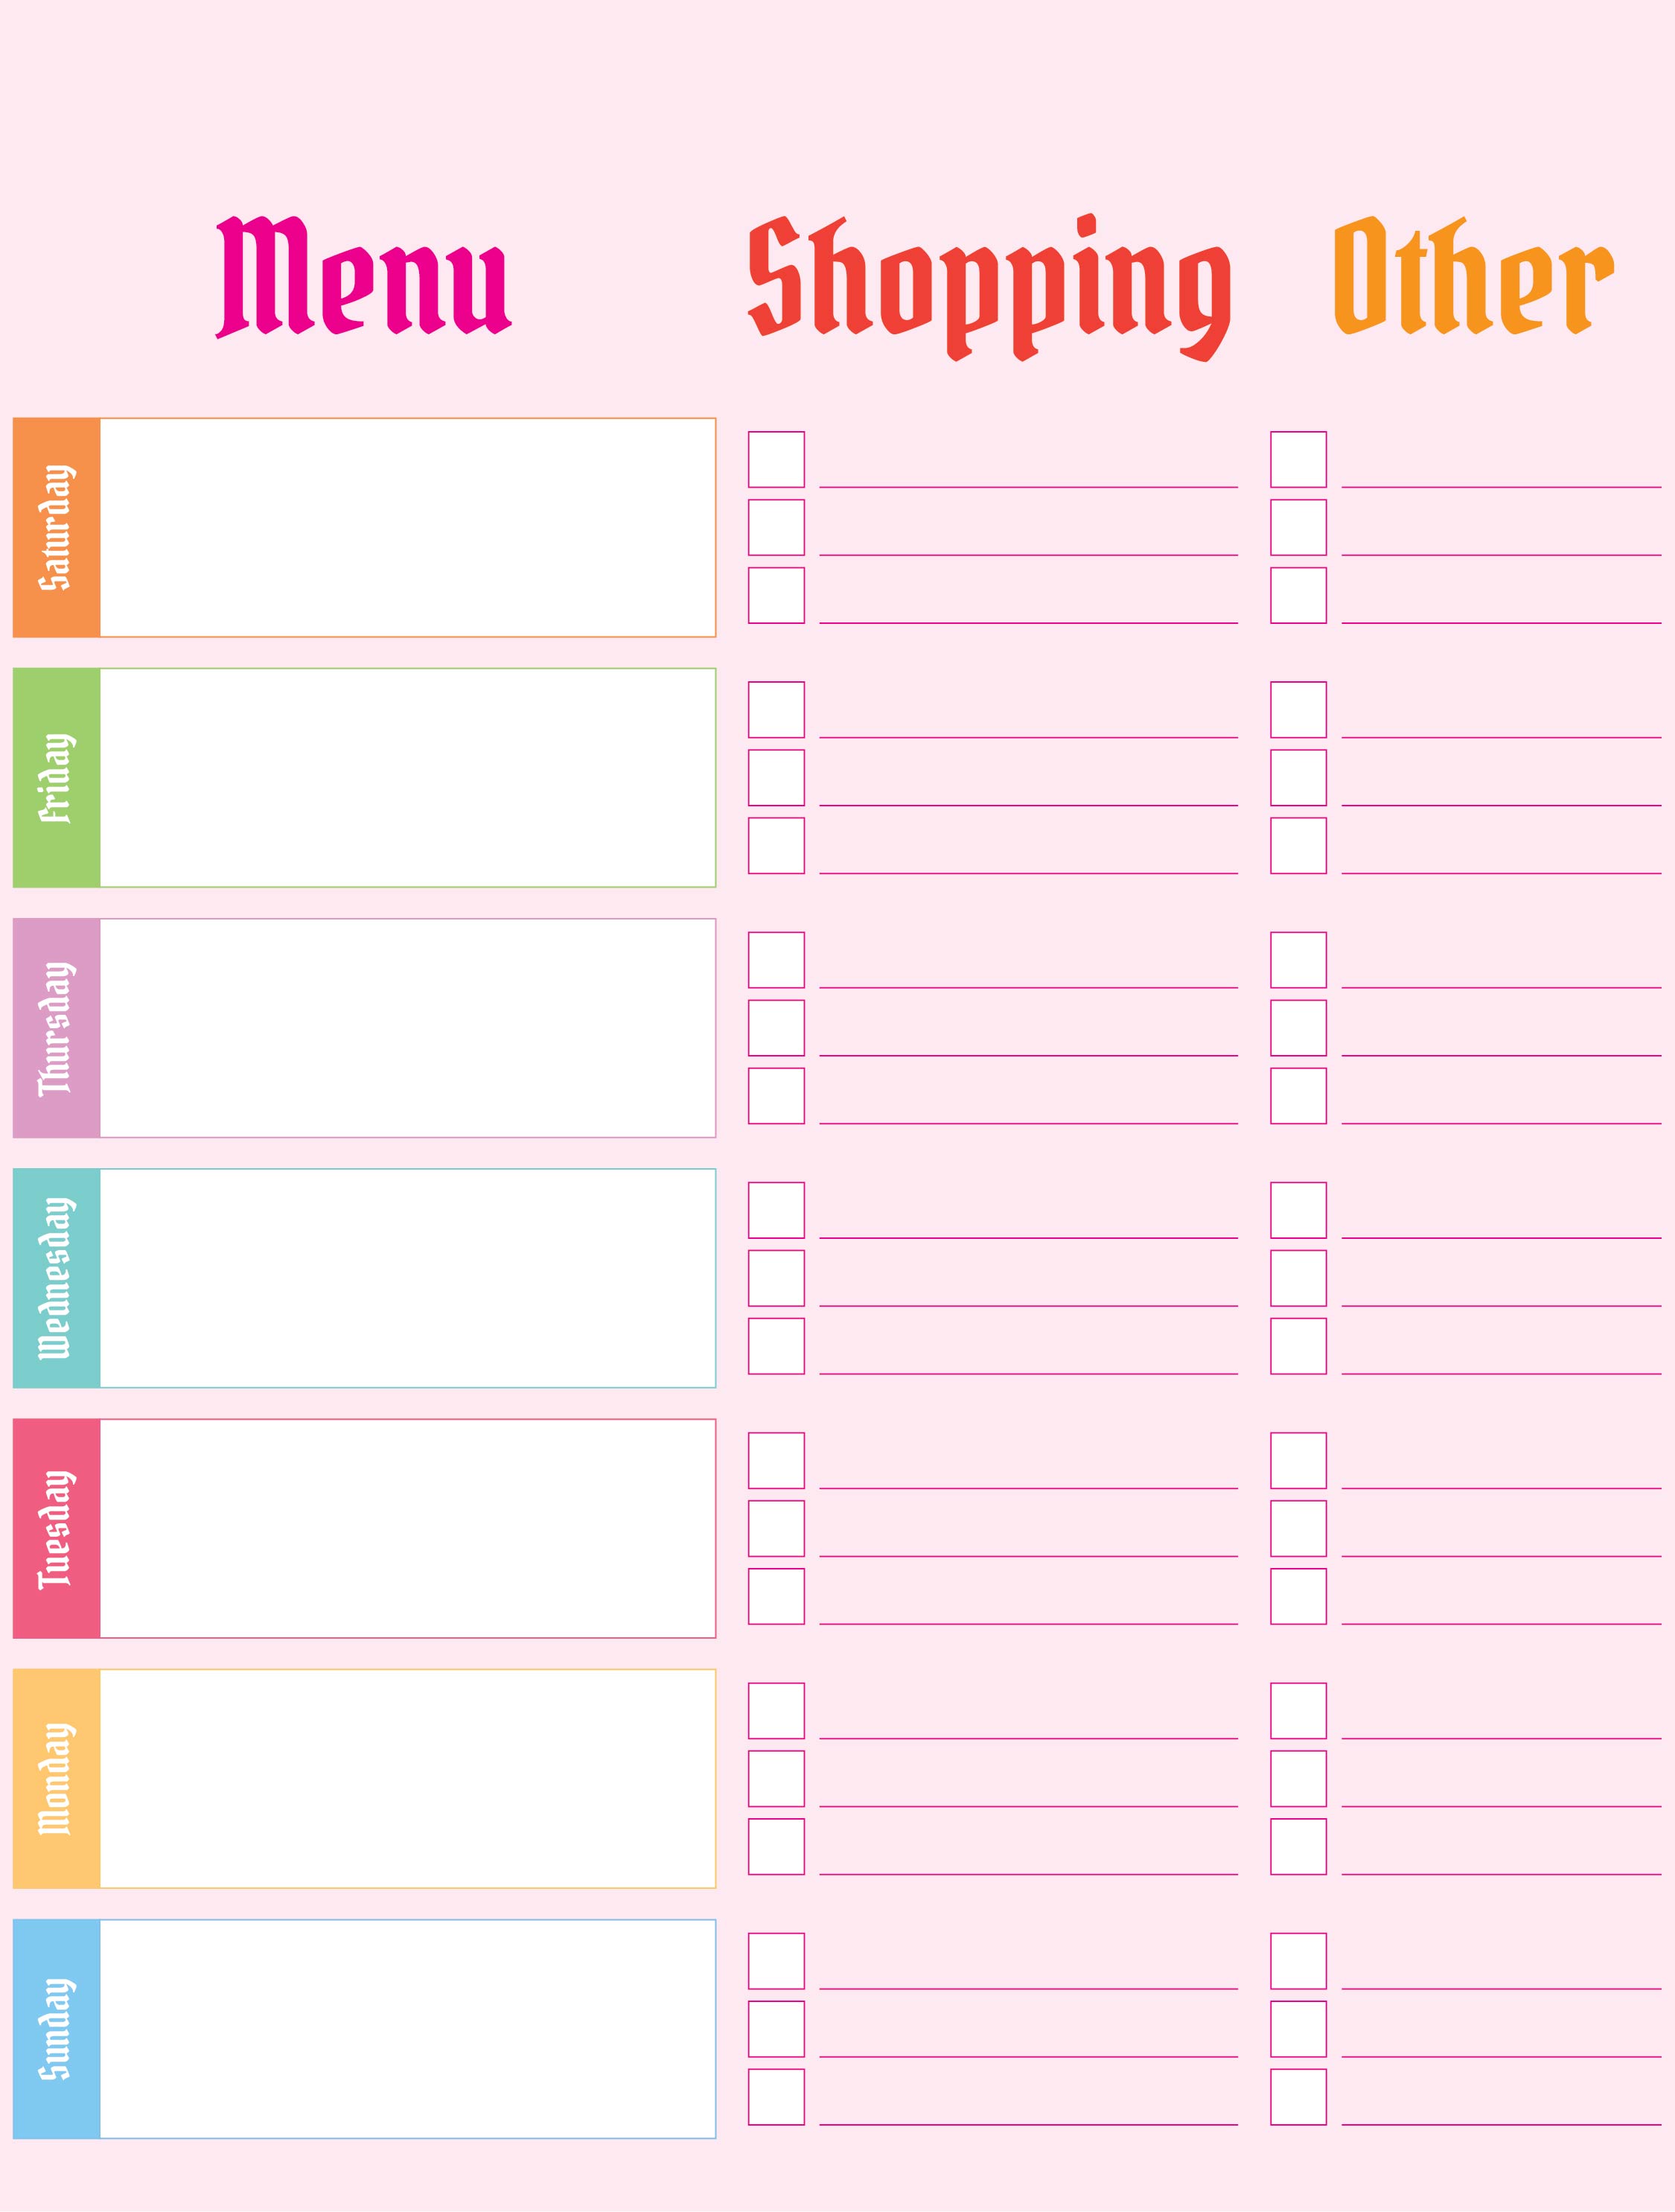 Menu Planner and Shopping List Template